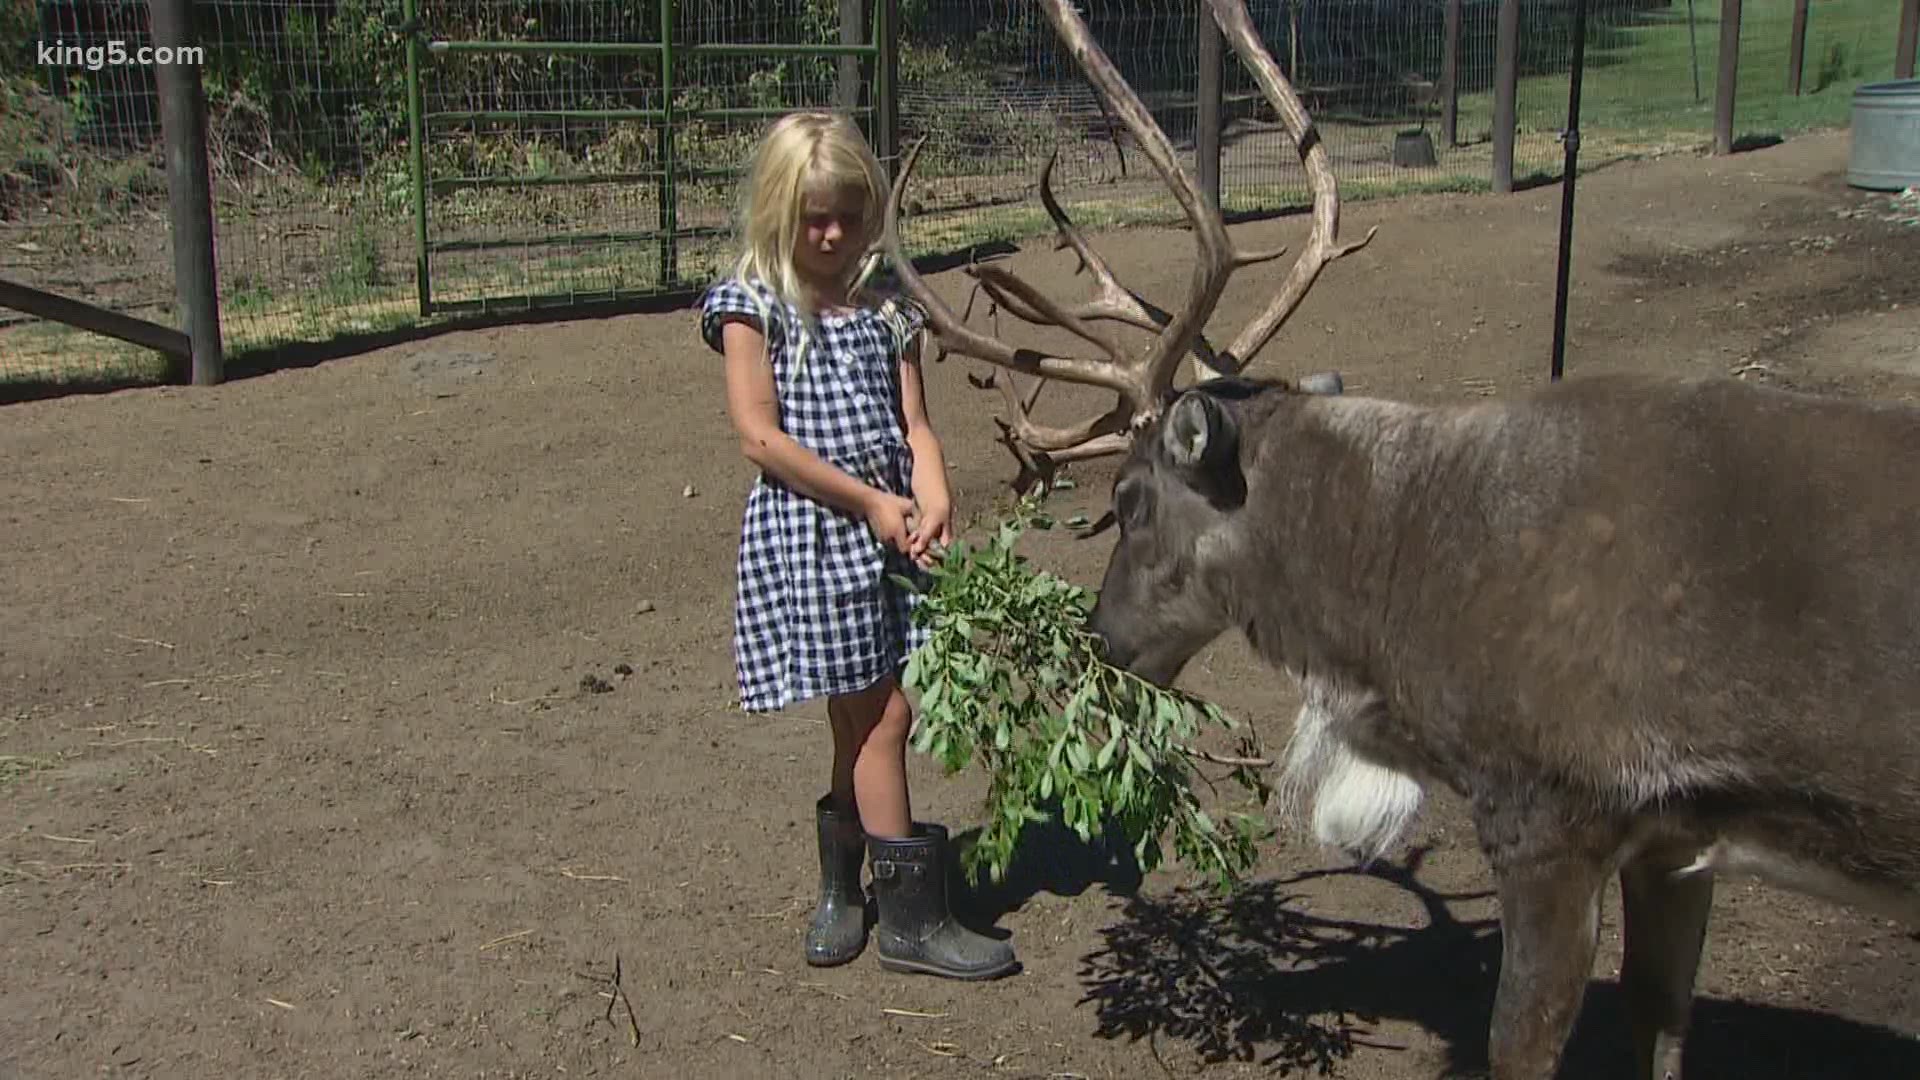 Leavenworth Reindeer Farm shut down to tourists in March after the first round of COVID-19 mandates. New rules on agritourism push hope of reopening out further.